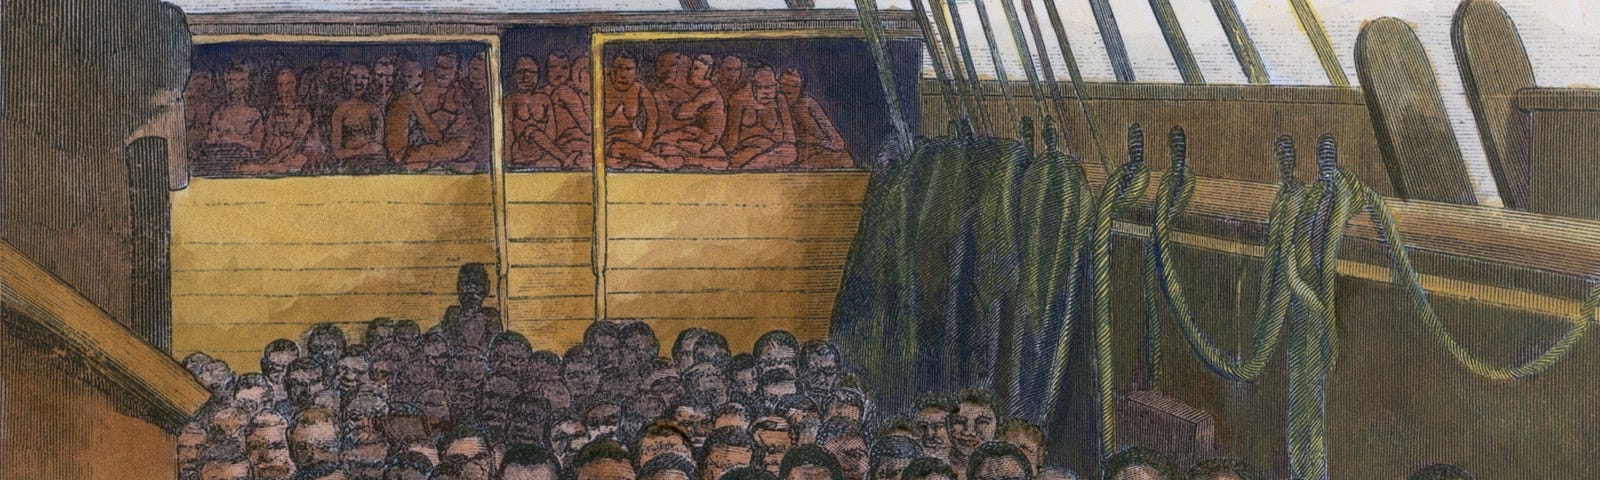 The slave deck of the ship ‘Wildfire’ captured transporting slaves 510 captives from Africa to the Caribbean, Wood engraving after daguerreotype made in Key West on April 30, 1860 with modern color.